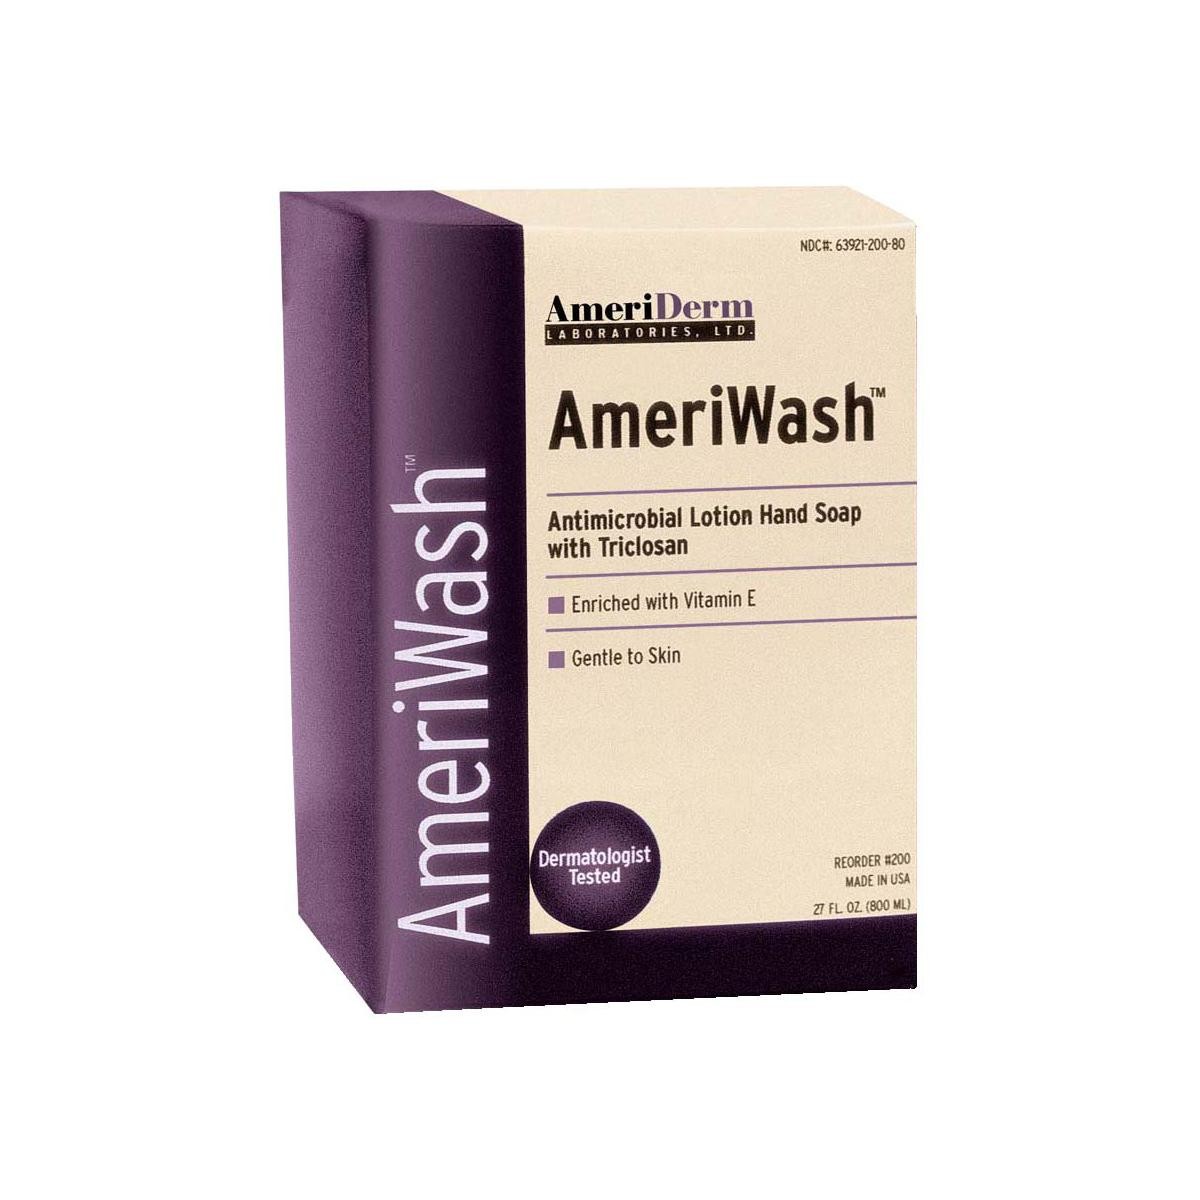 AmeriWash Antimicrobial Lotion Soap with Triclosan, 800 mL